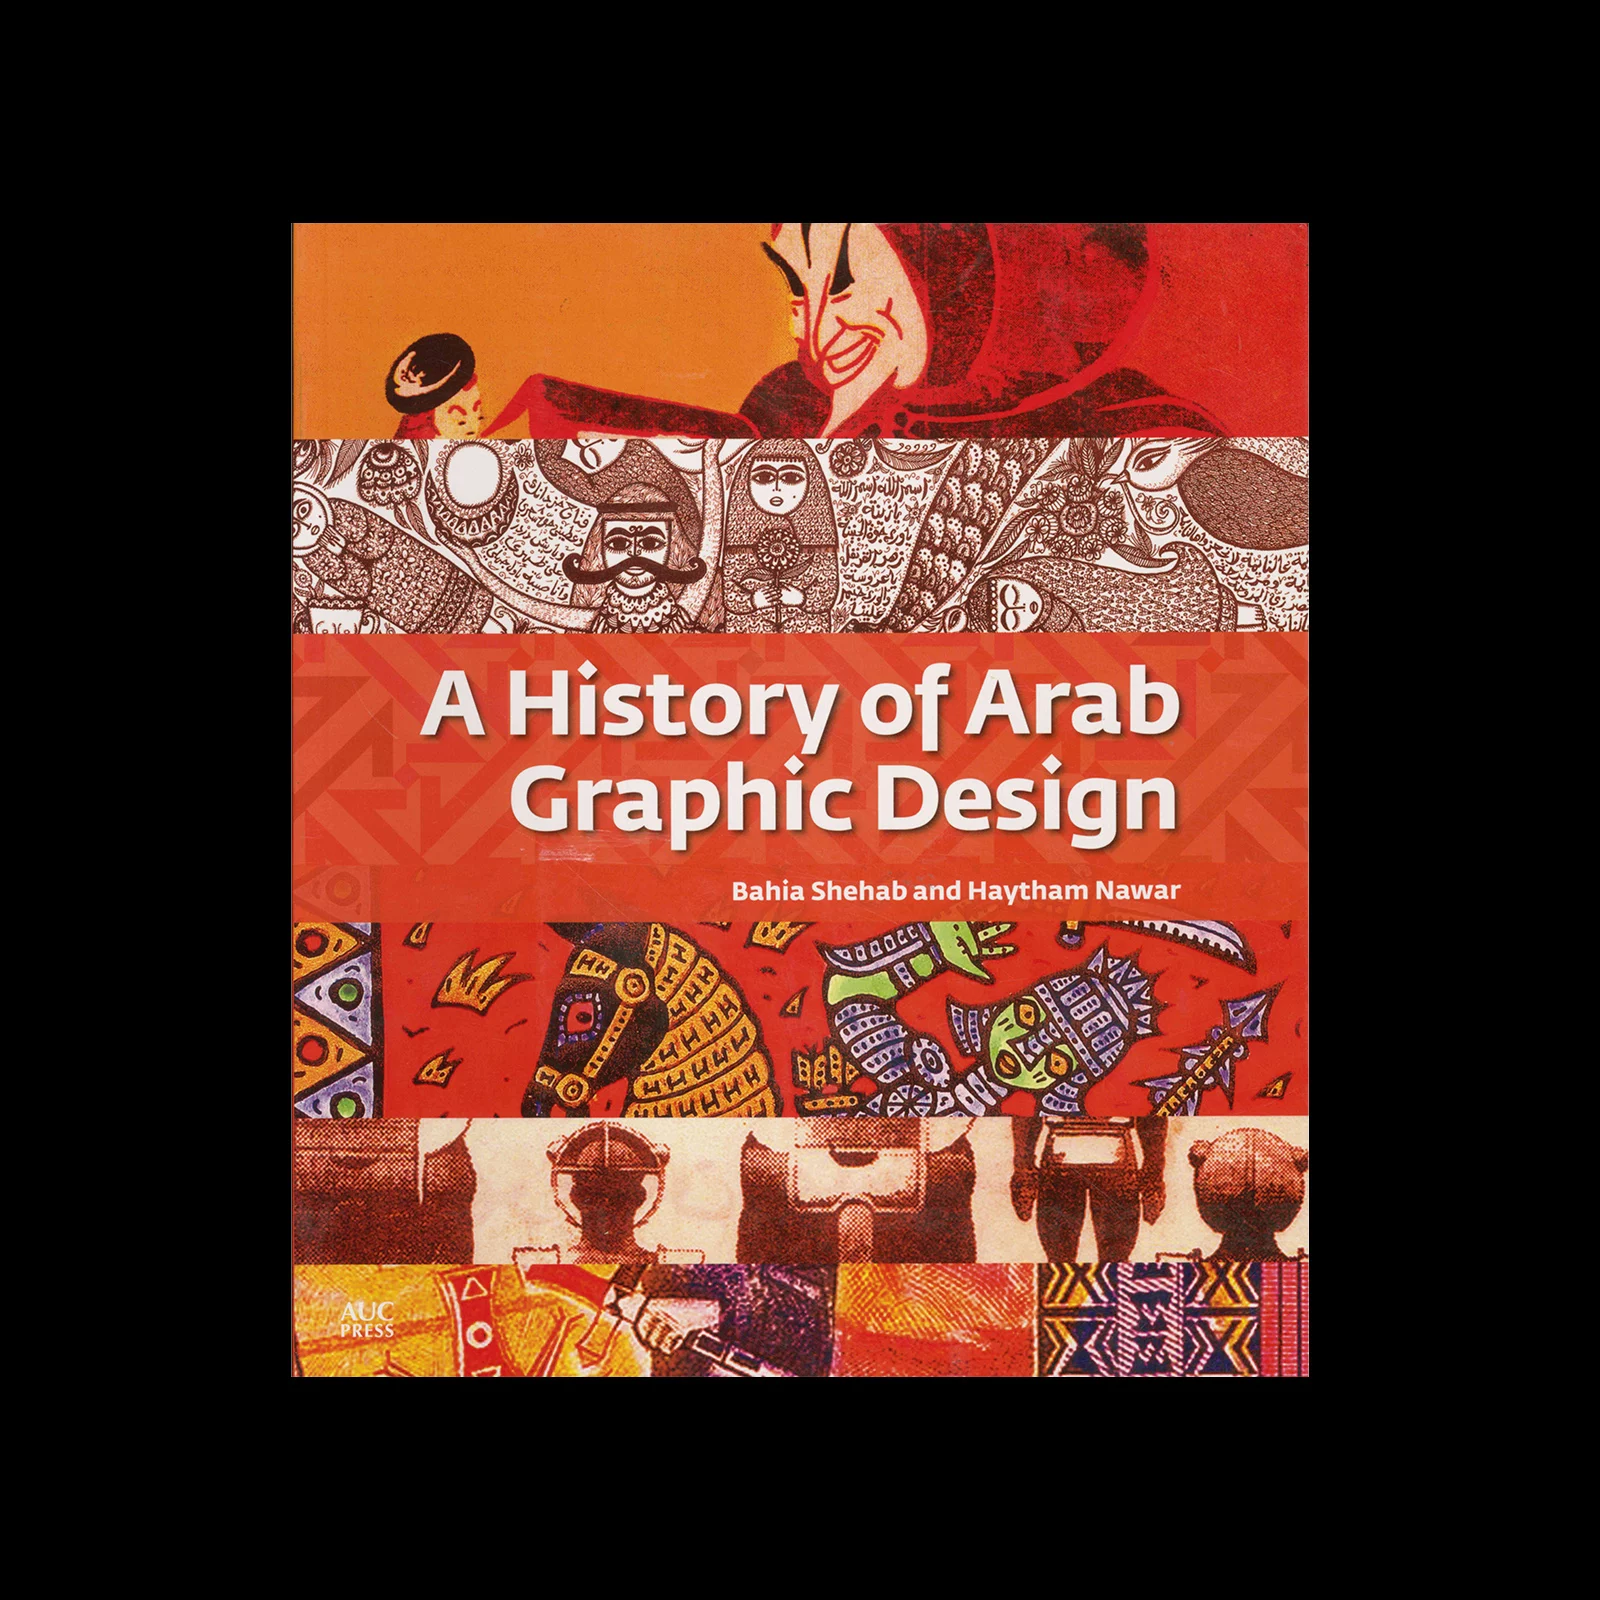 A History of Arab Graphic Design, The American University in Cairo Press, 2020